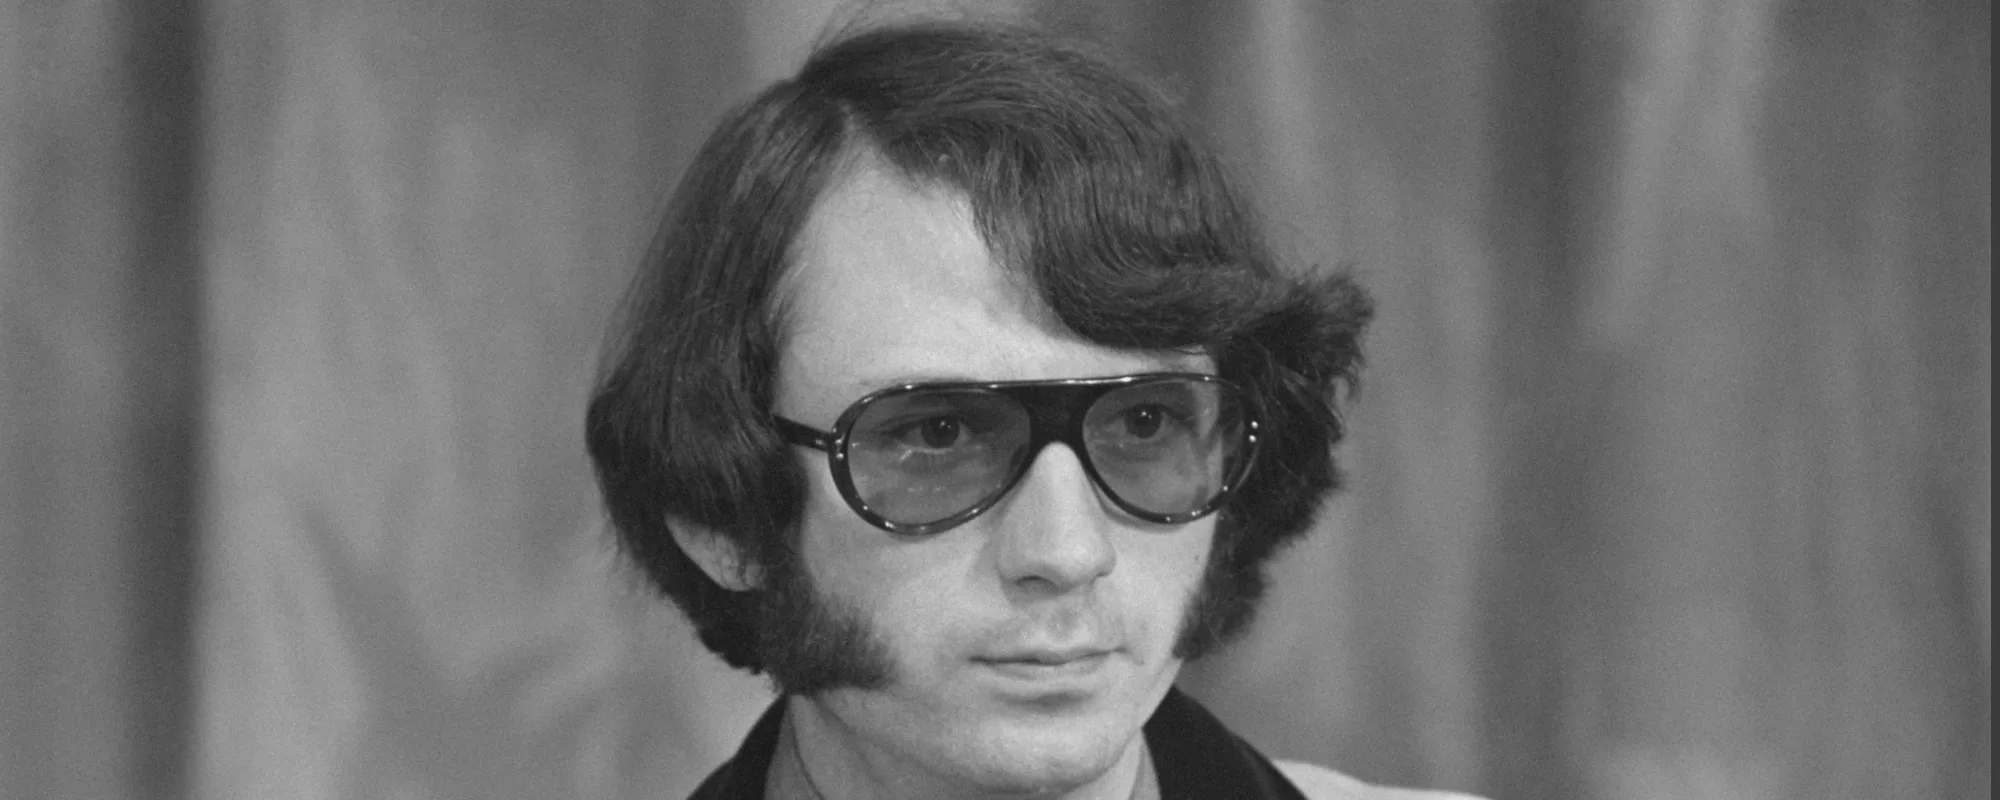 The Monkees’ Micky Dolenz Issues Statement About Michael Nesmith’s Death